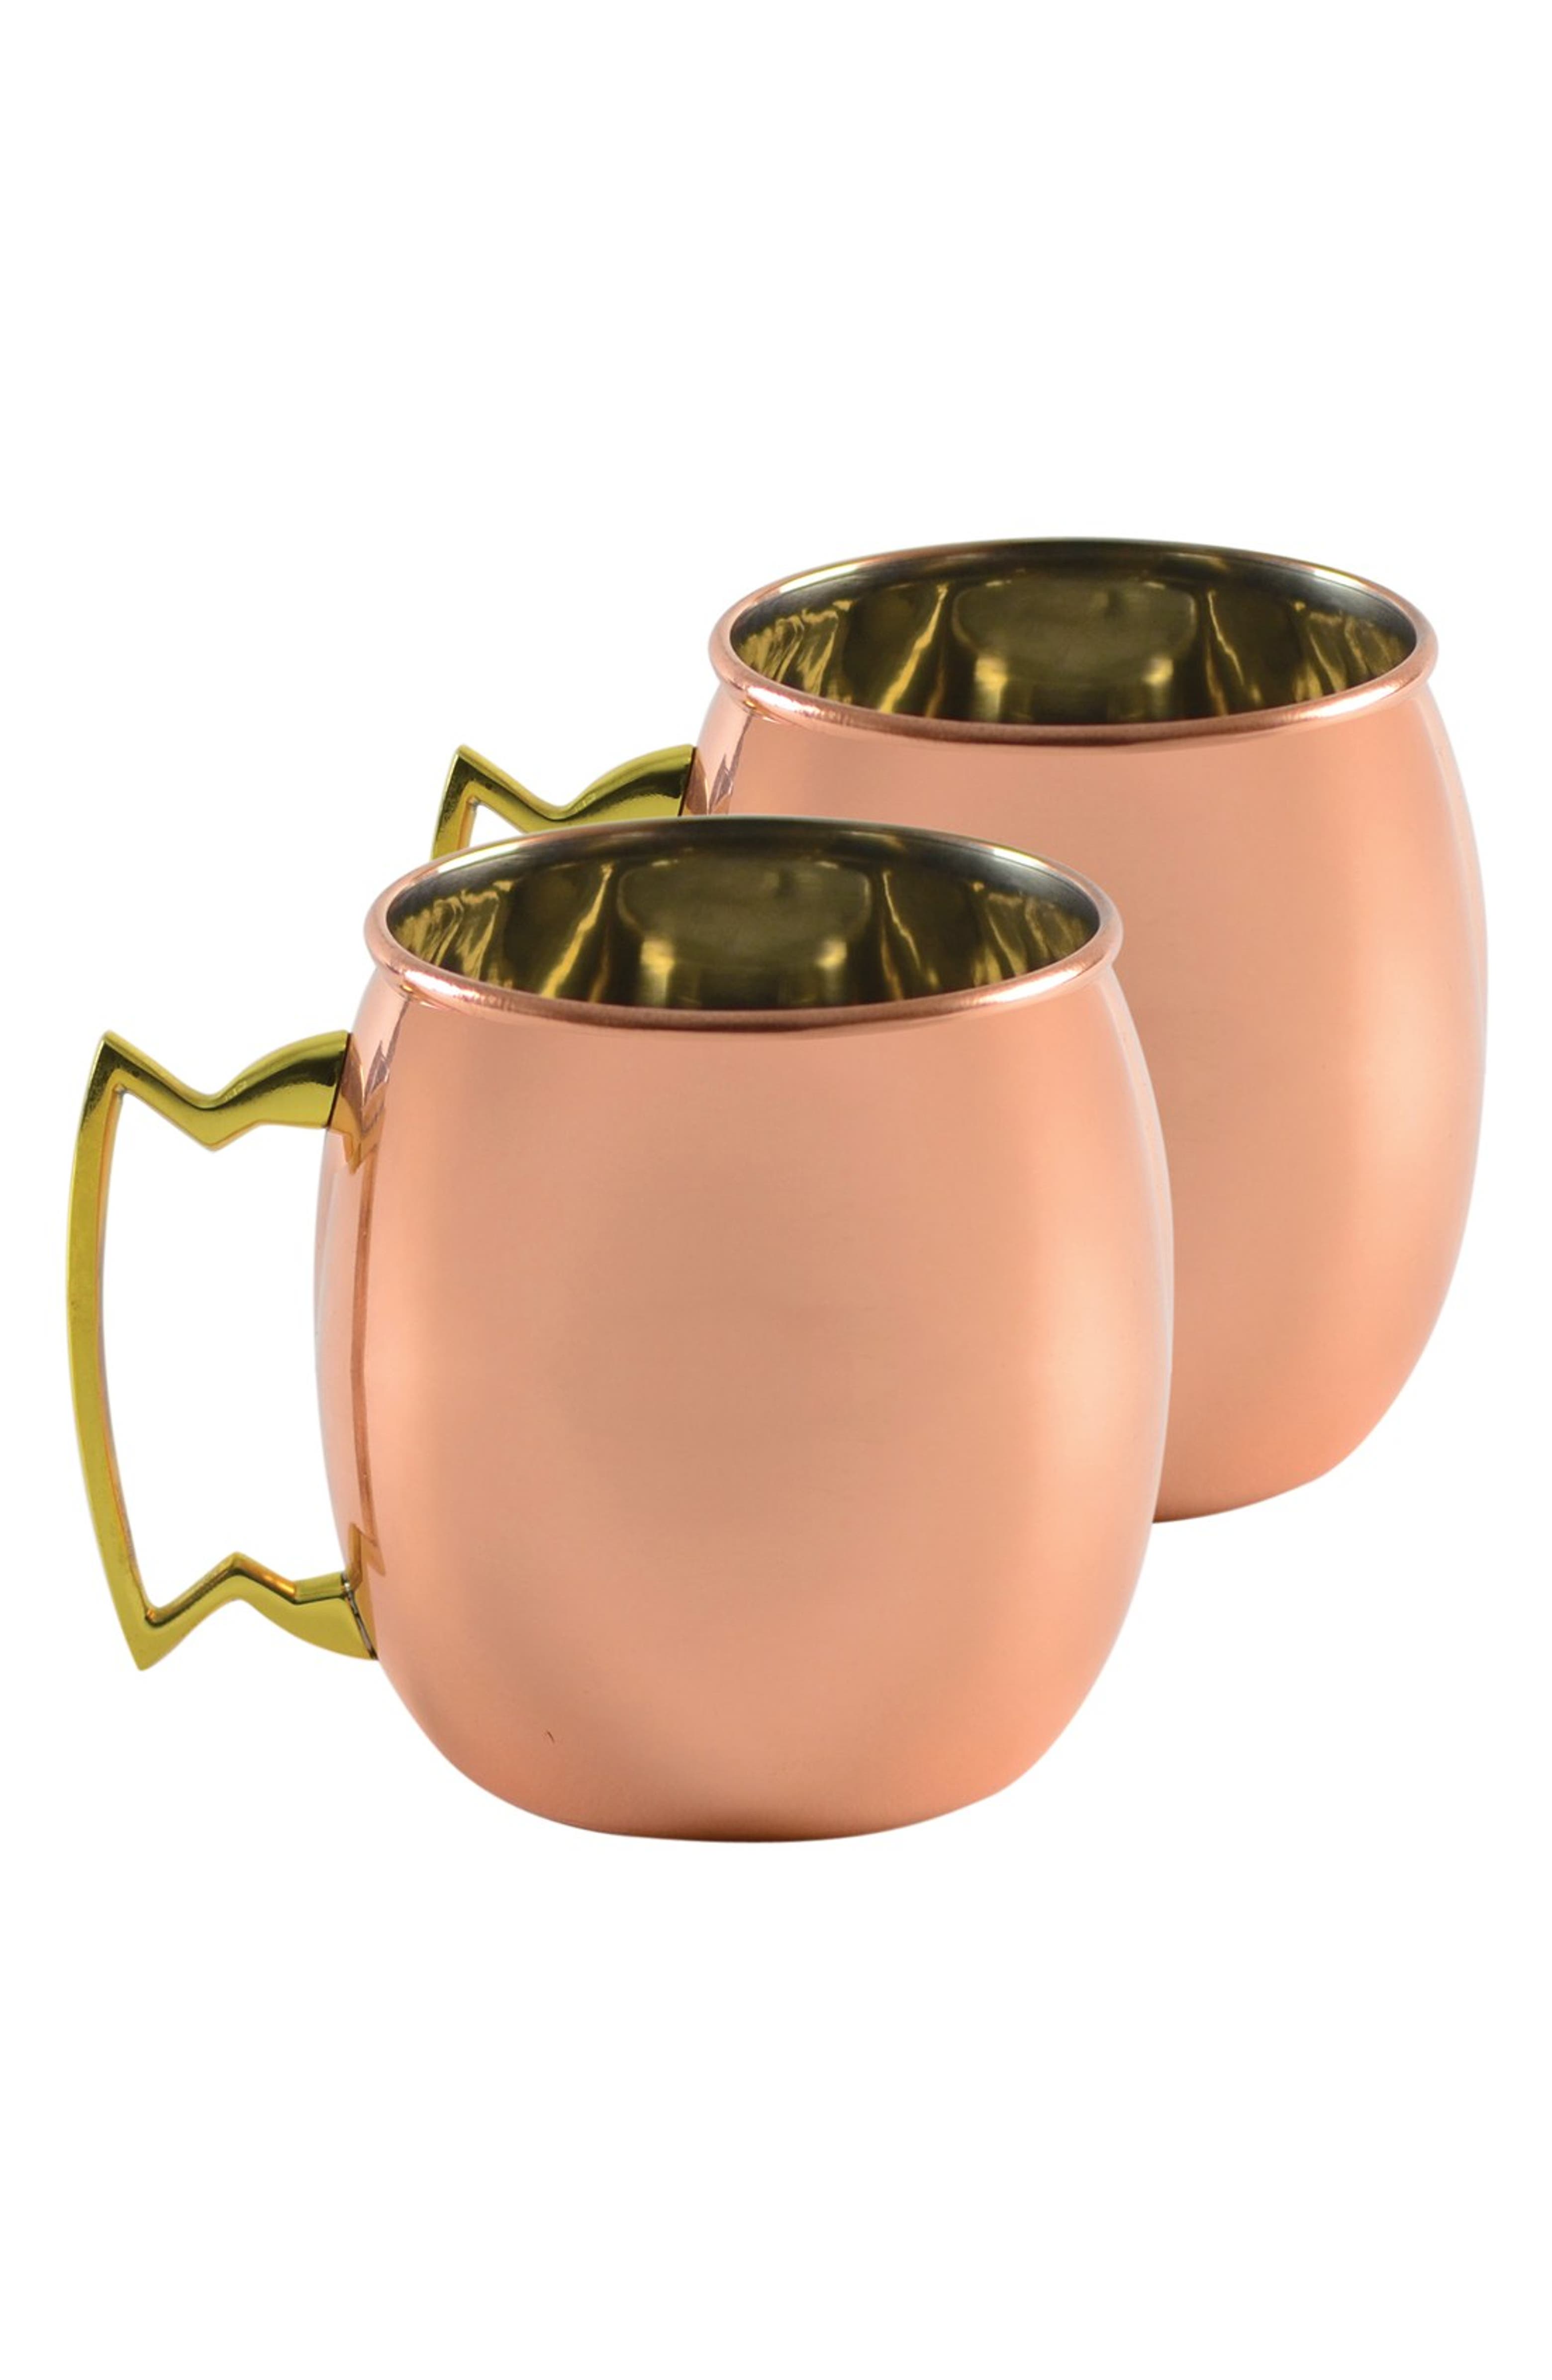 10 Strawberry Street 'Moscow Mule' Copper Mugs (Set of 2